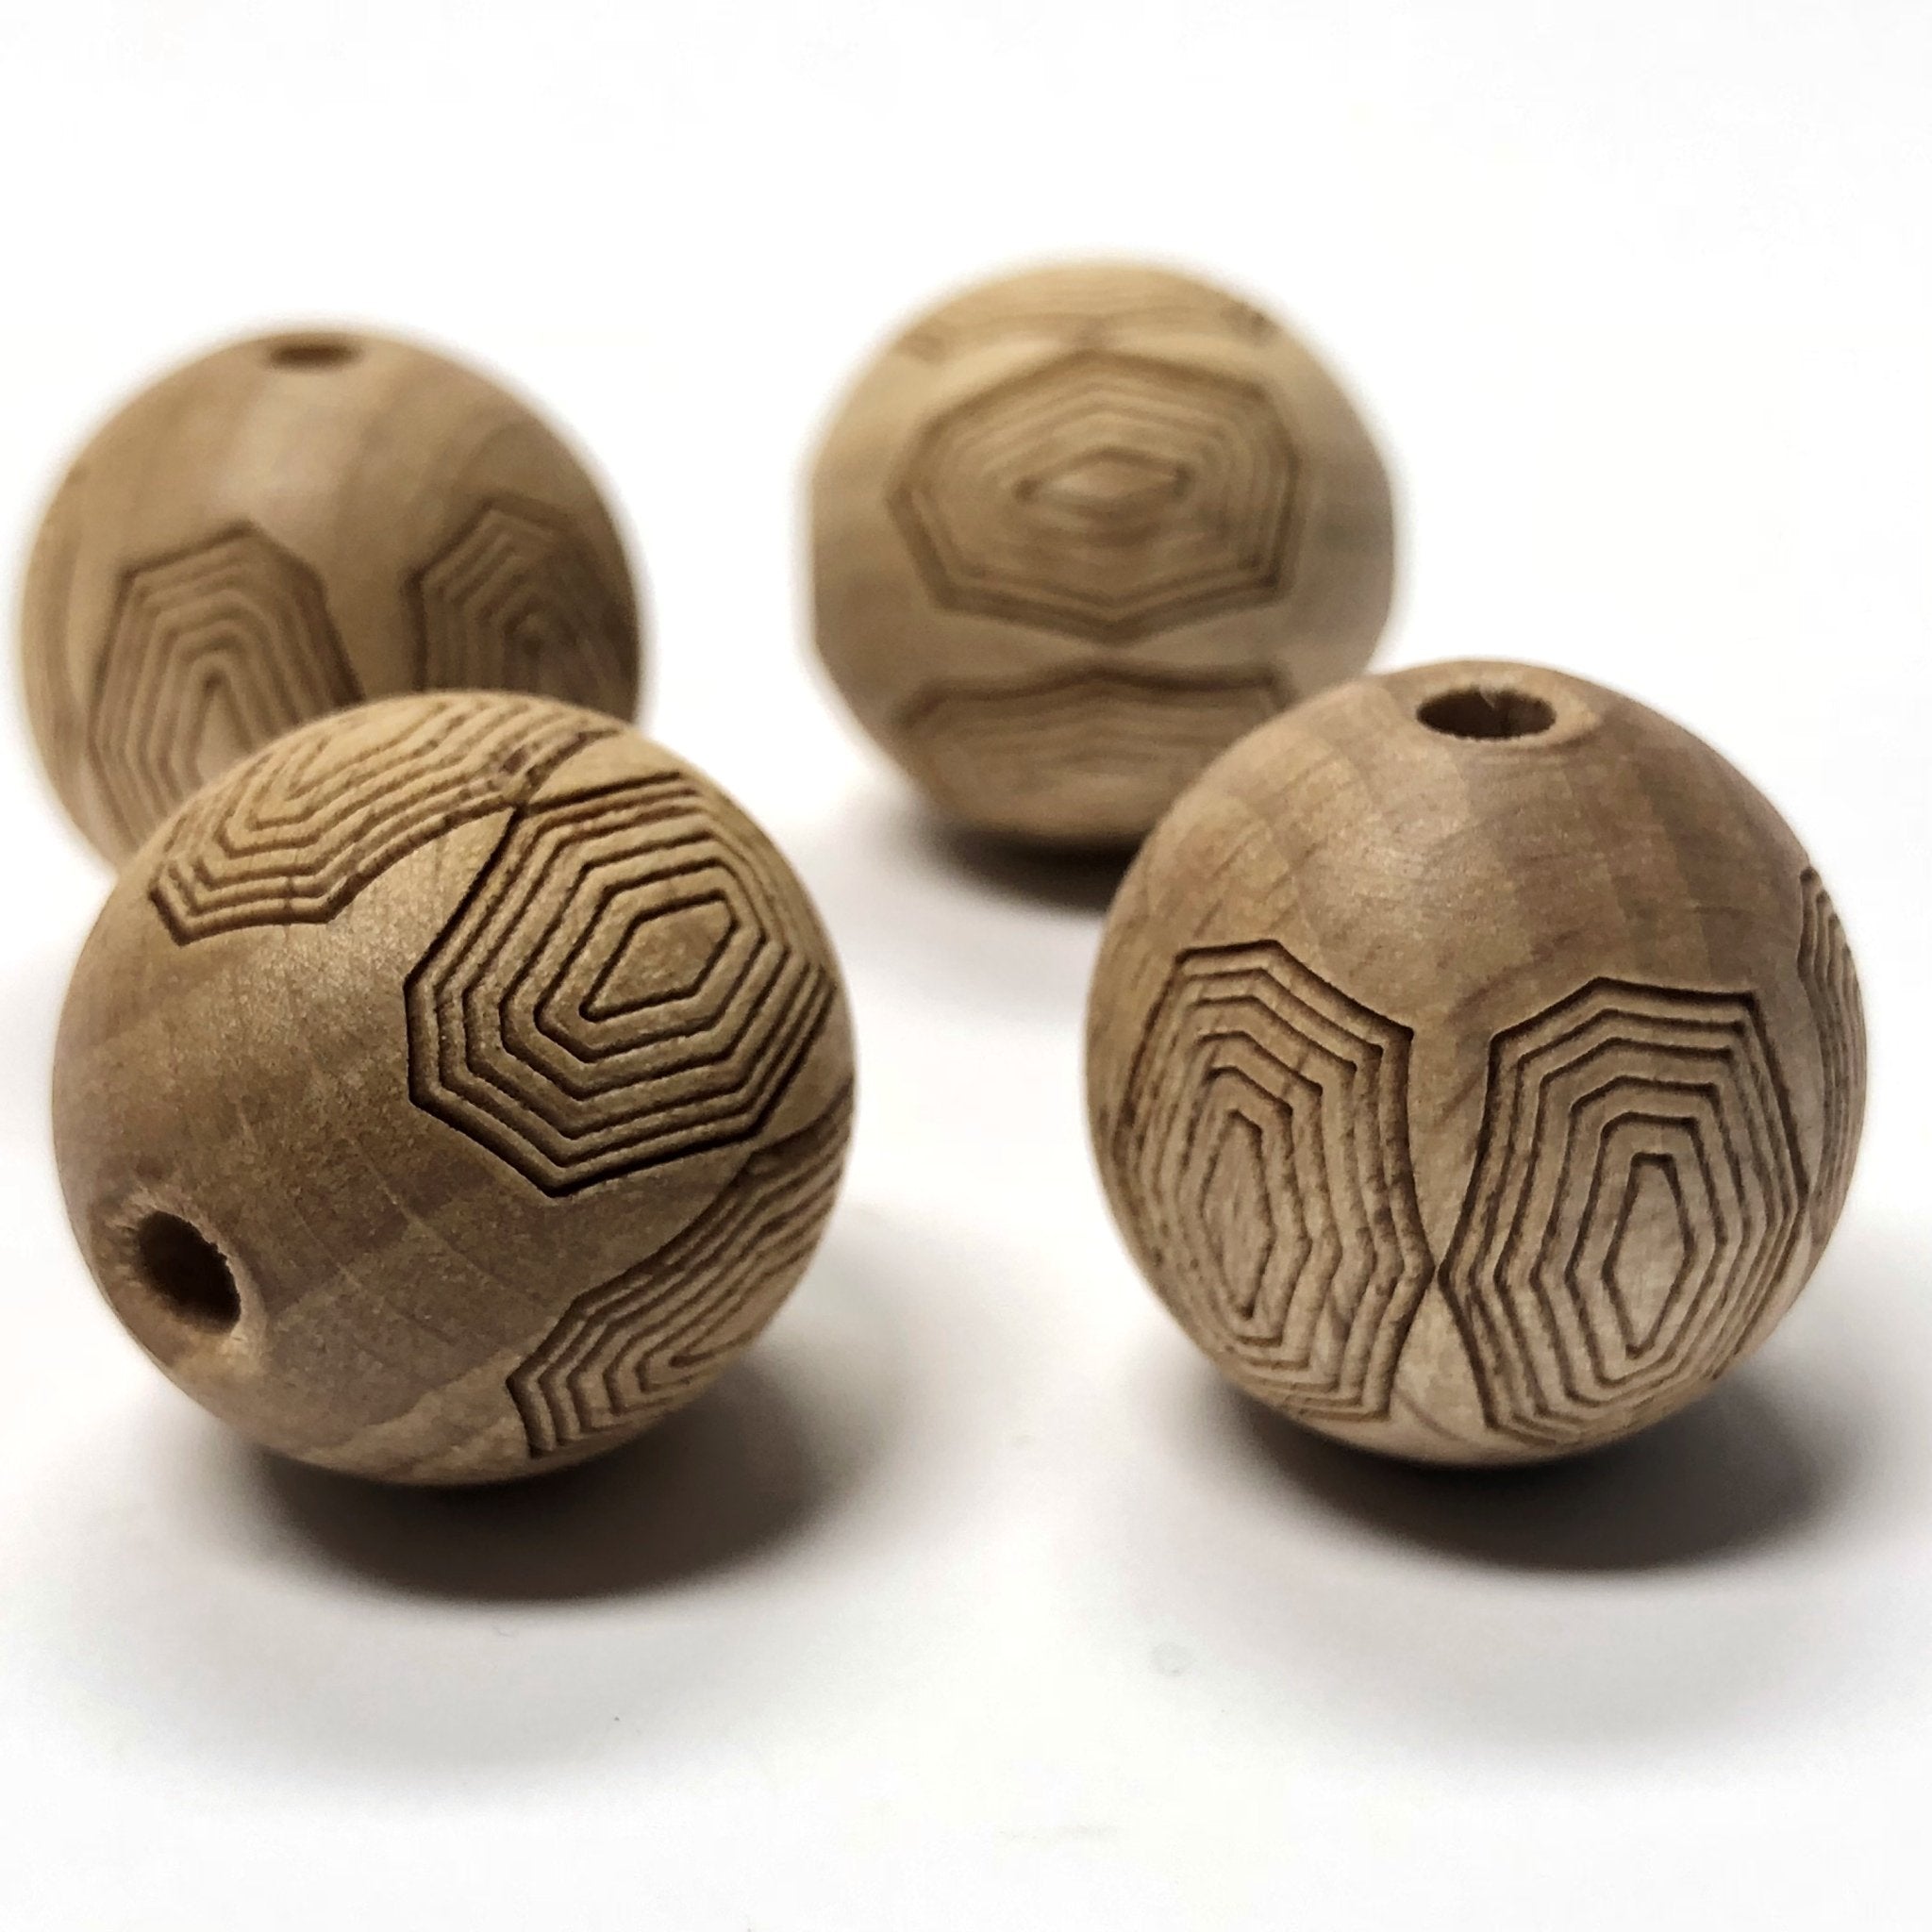 12MM "Legno Shell" Wood Bead (12 pieces)